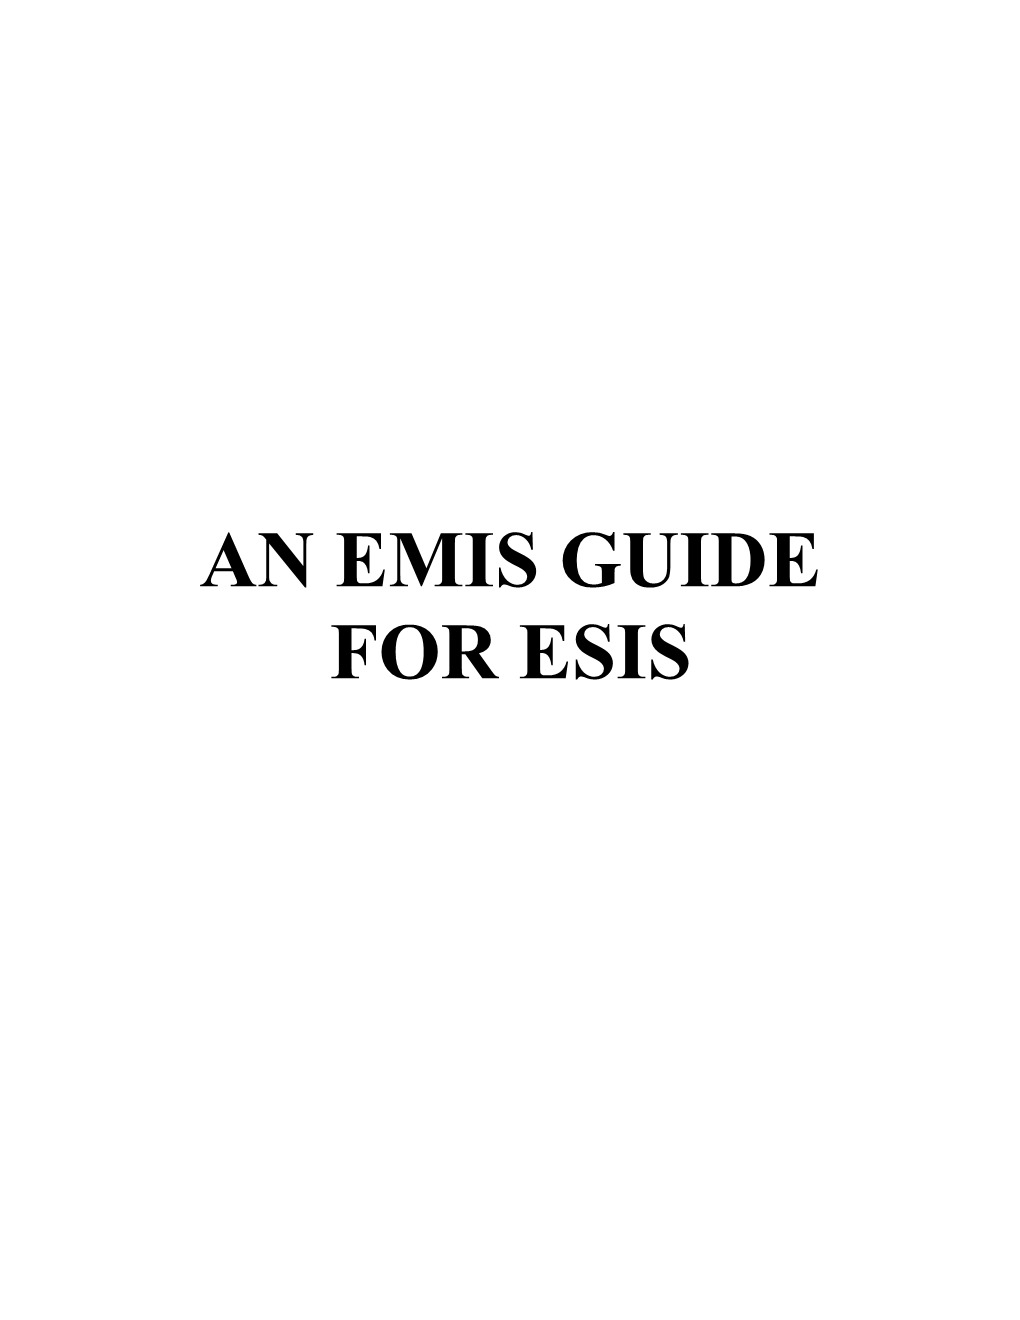 An Emis Guide for Esis